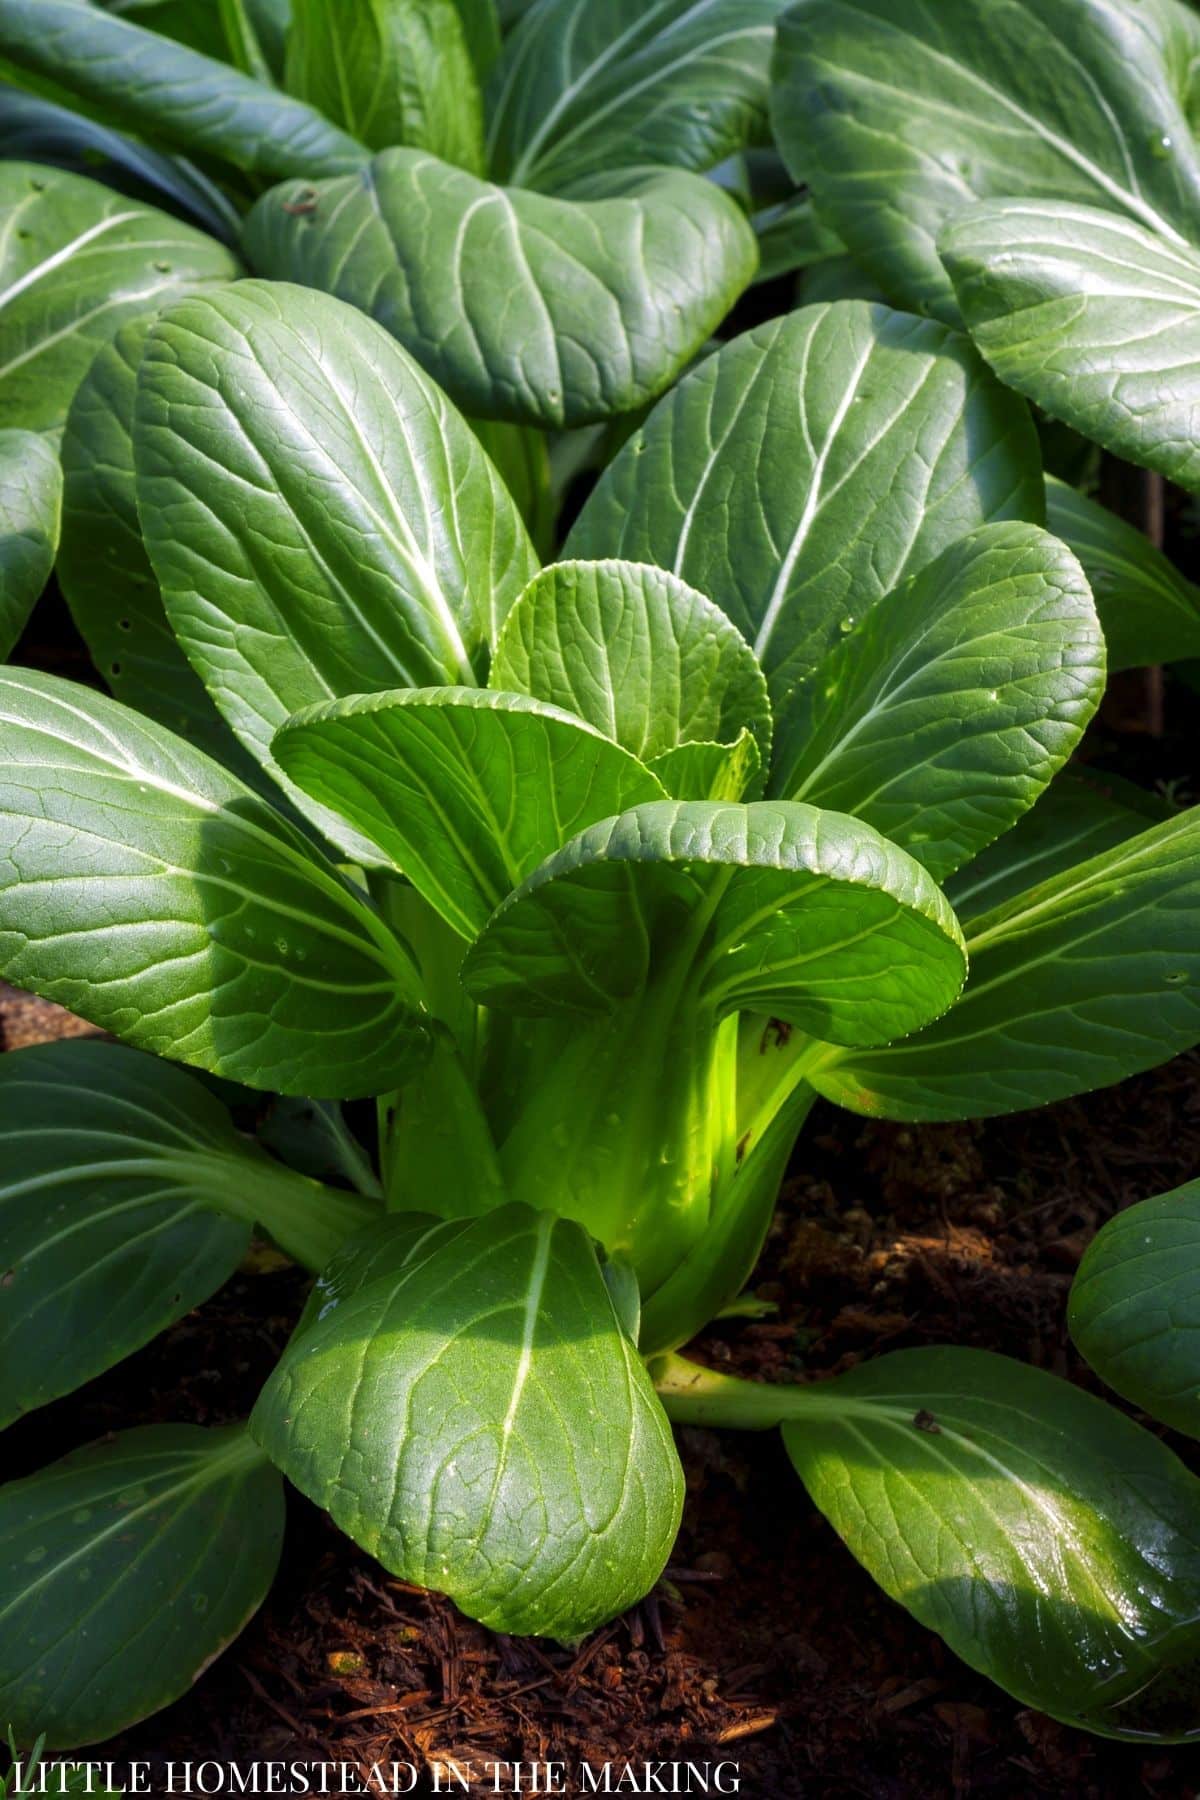 A bok choy plant with fanned out leaves, growing in soil.